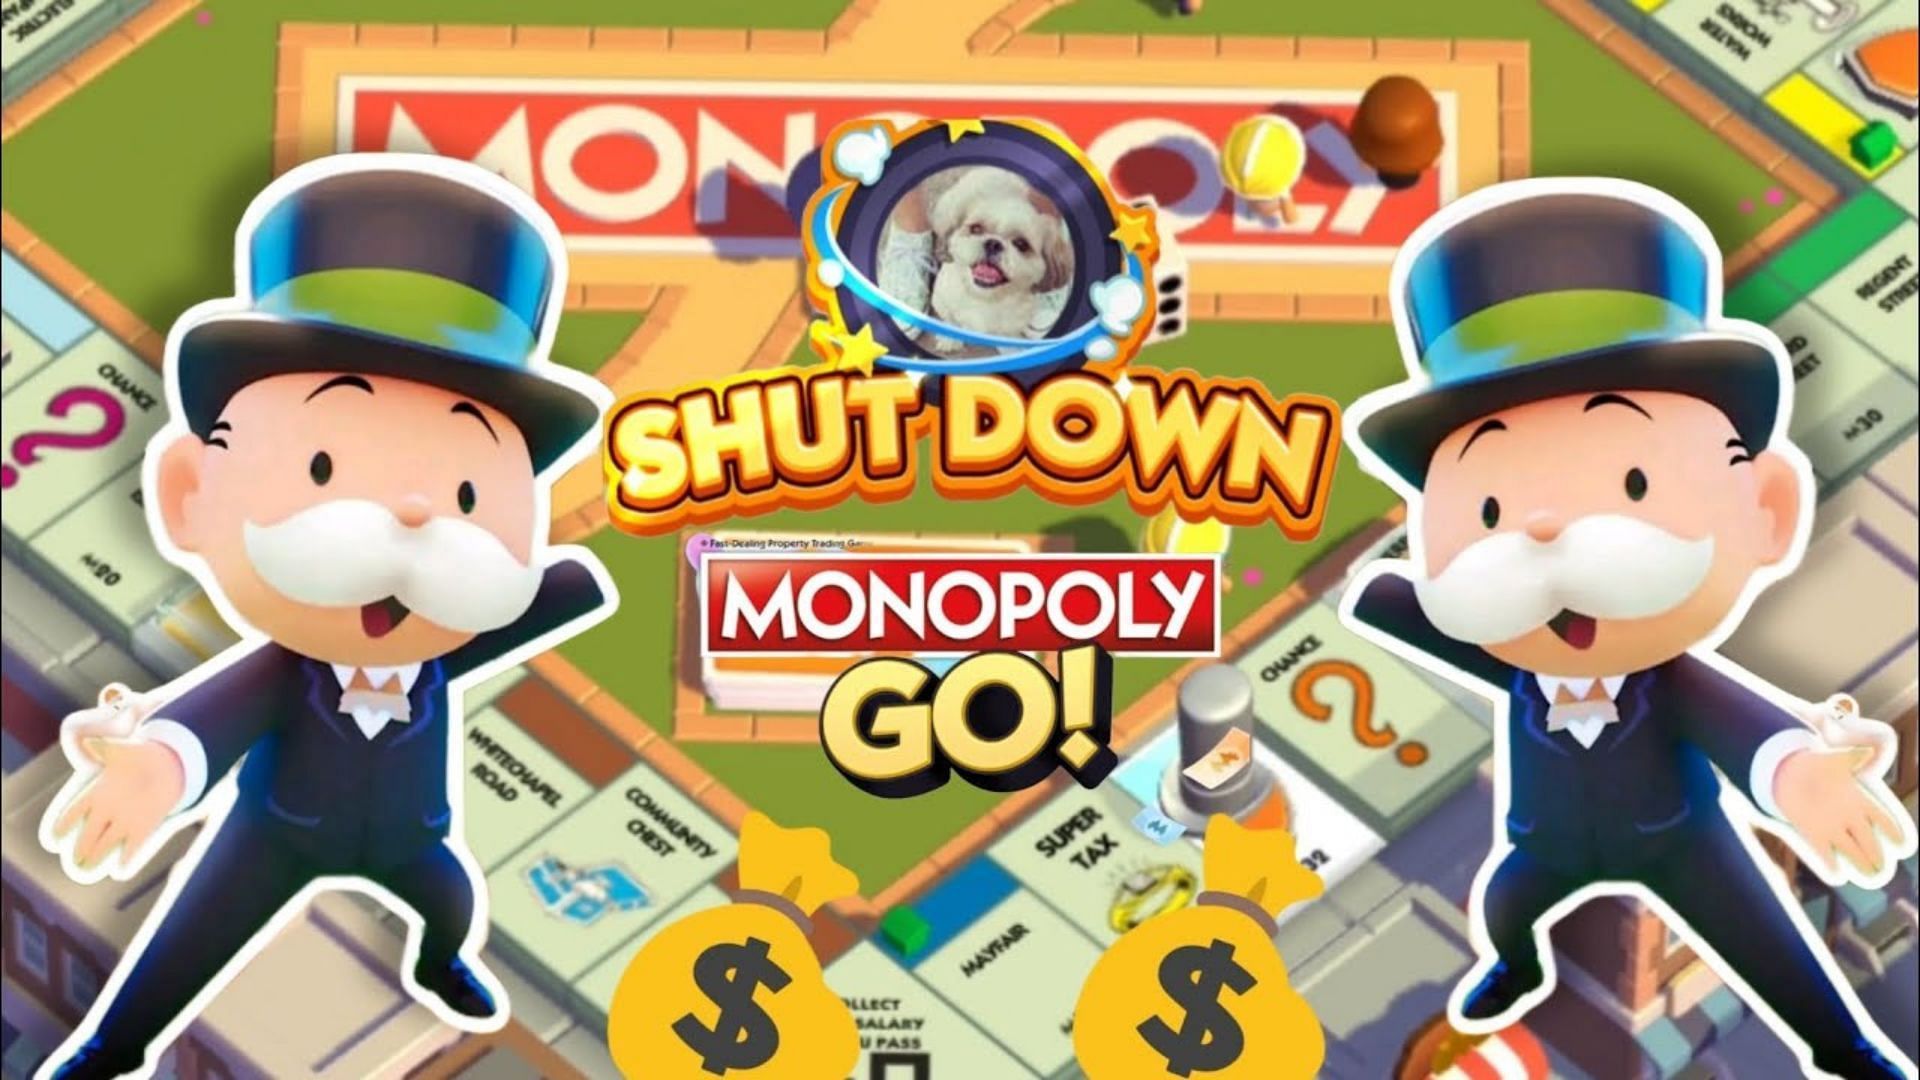 One minigame called Shutdown in Monopoly GO